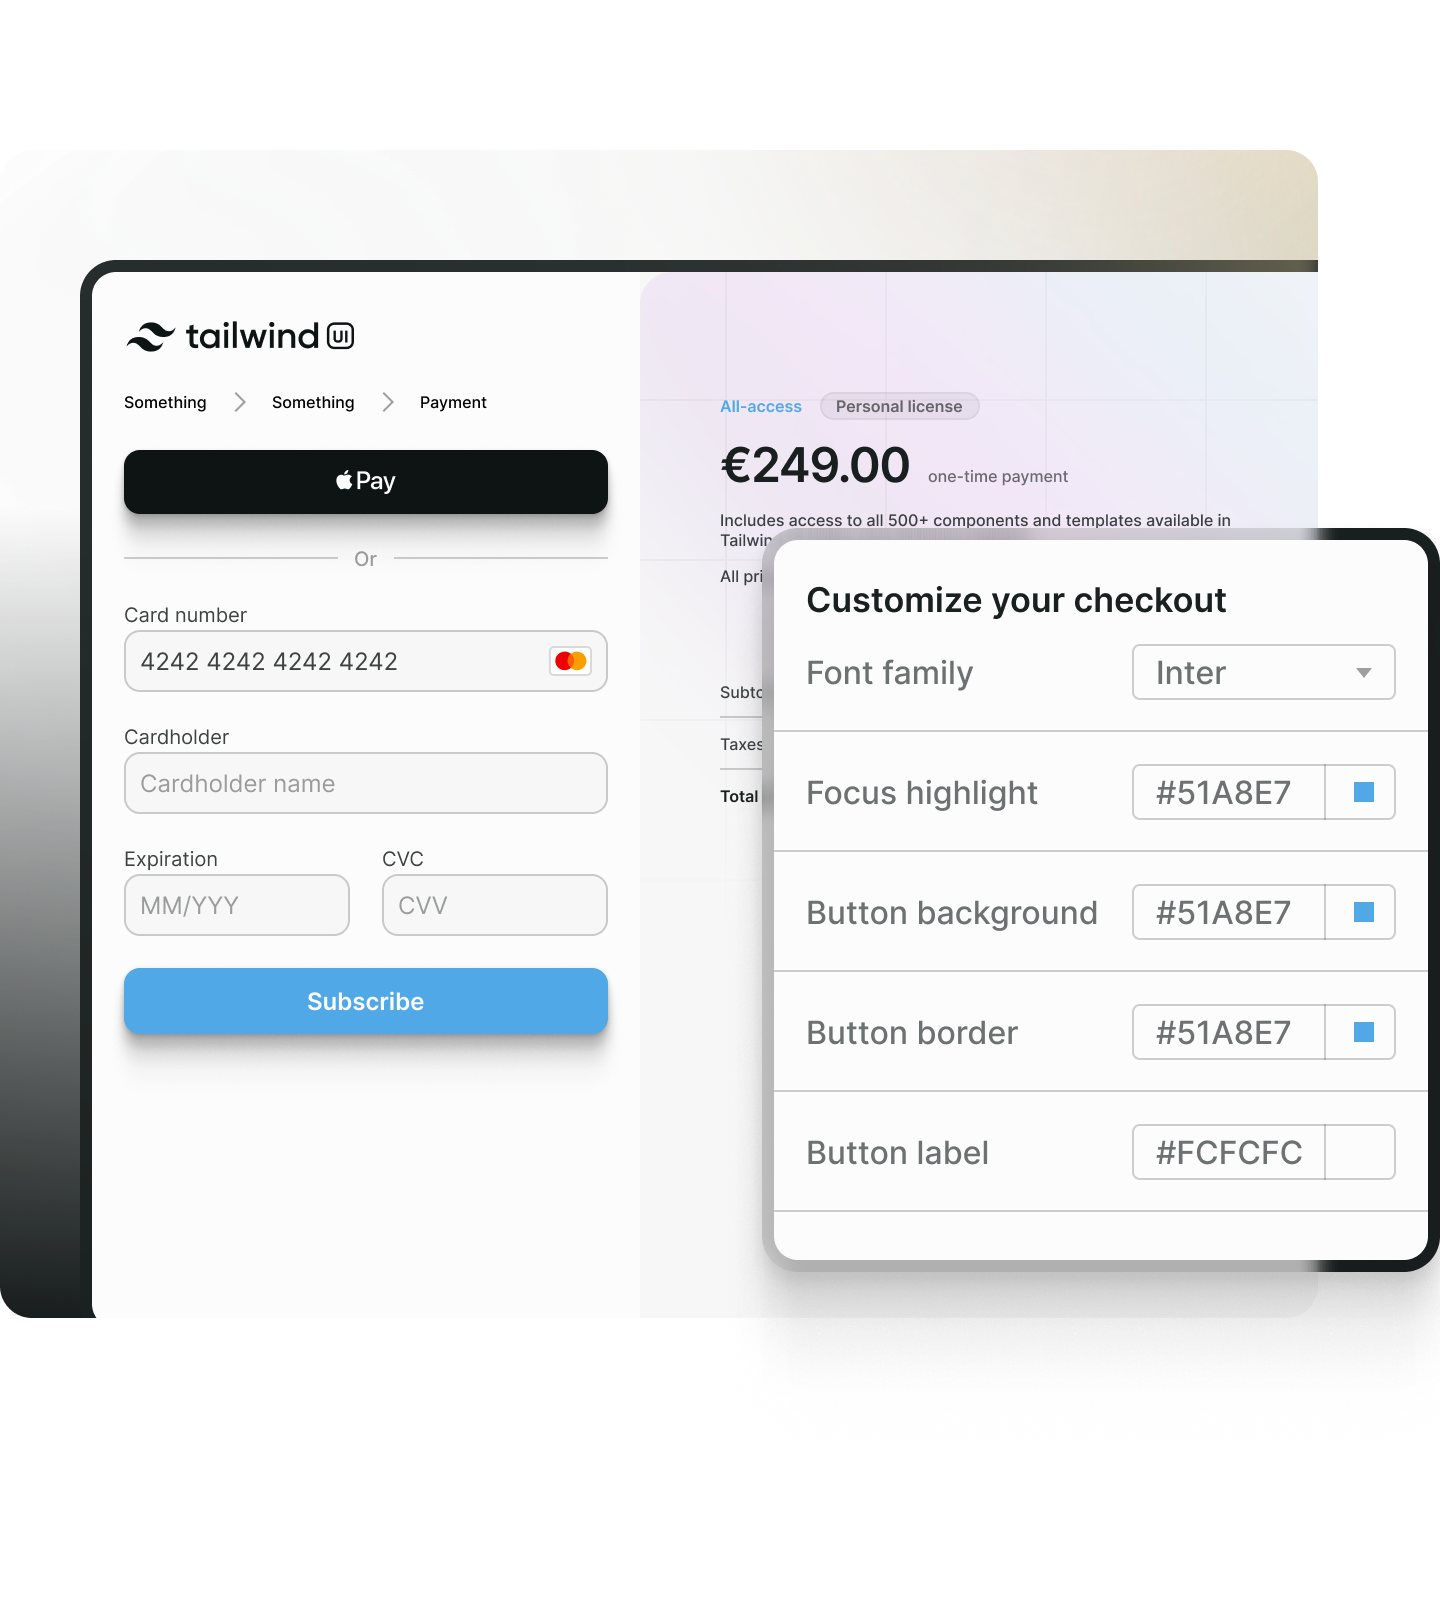 Customize your checkout to match your brand